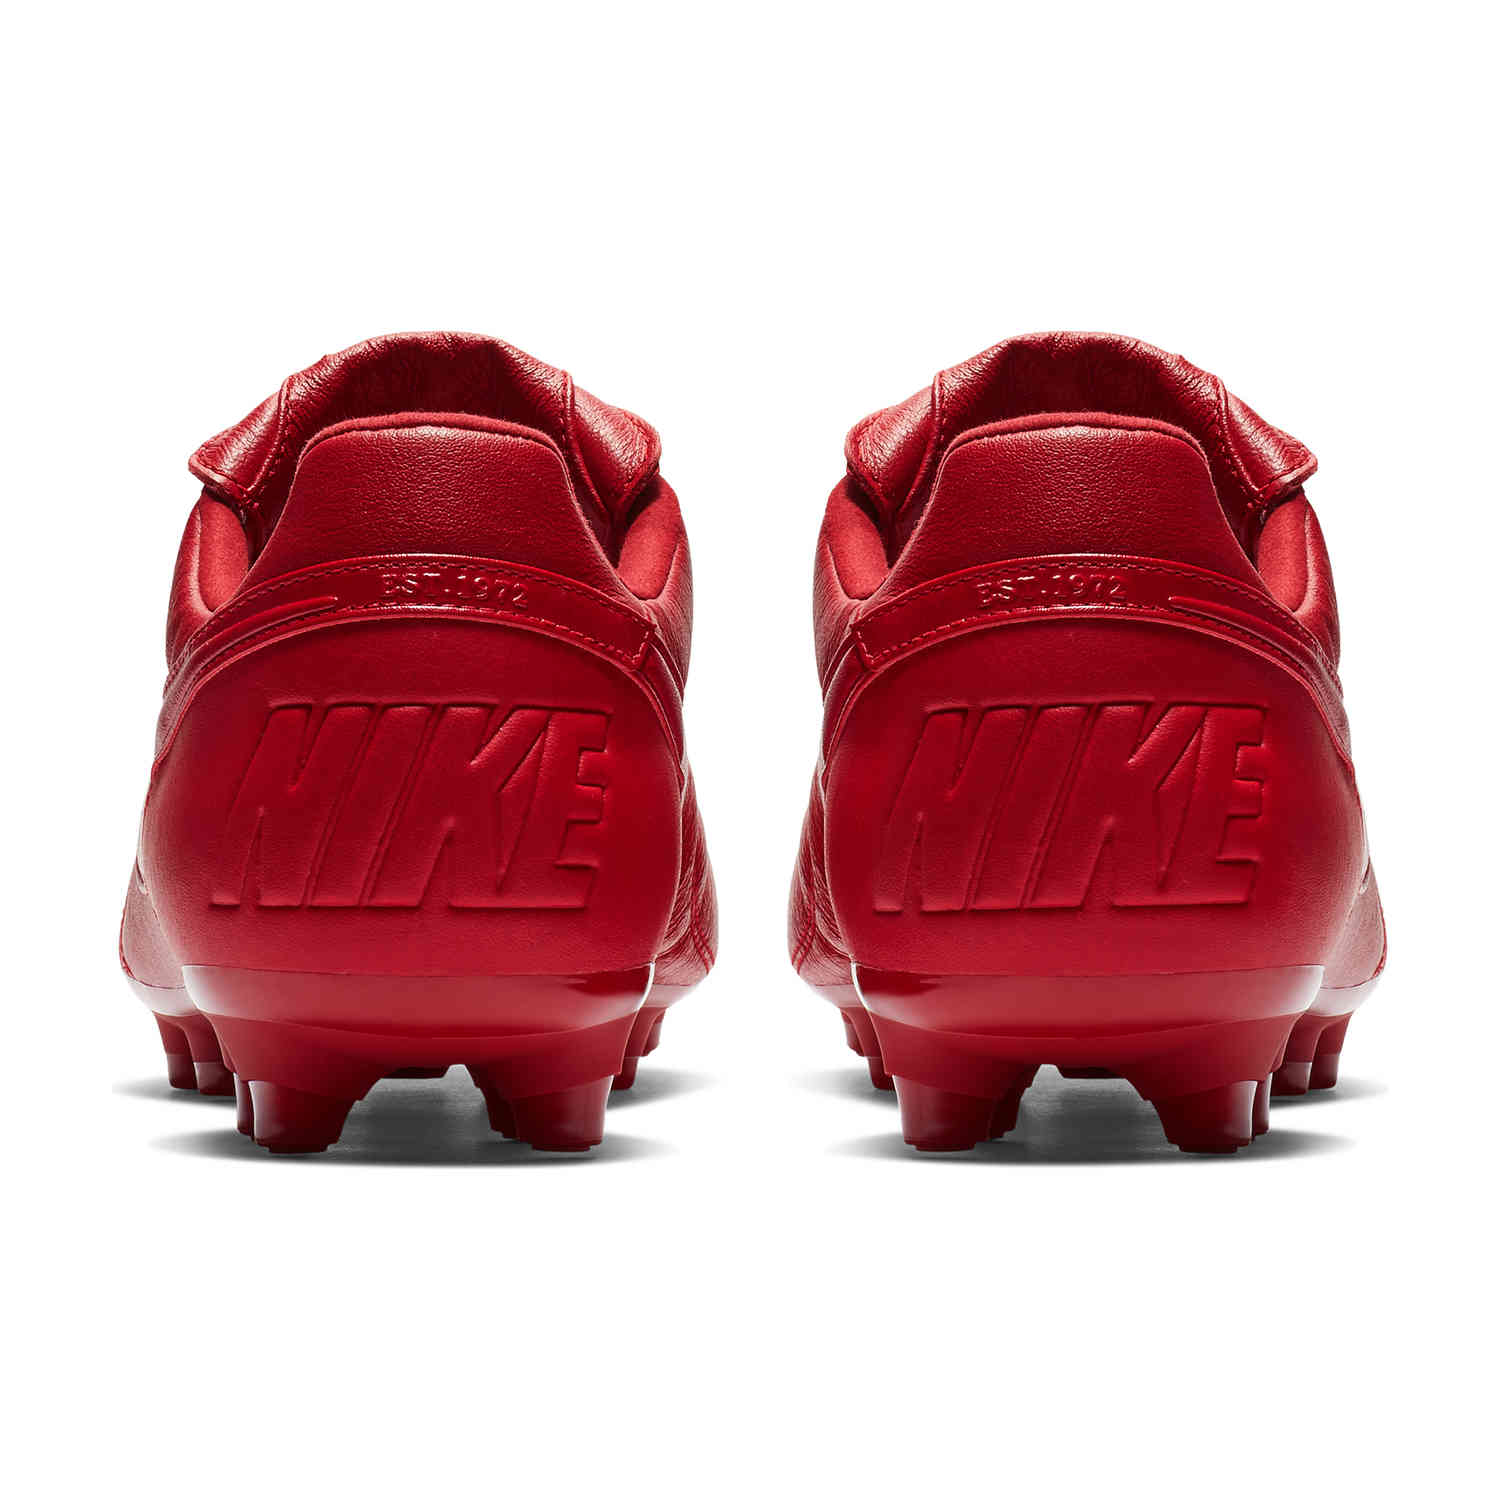 nike premier cleats red